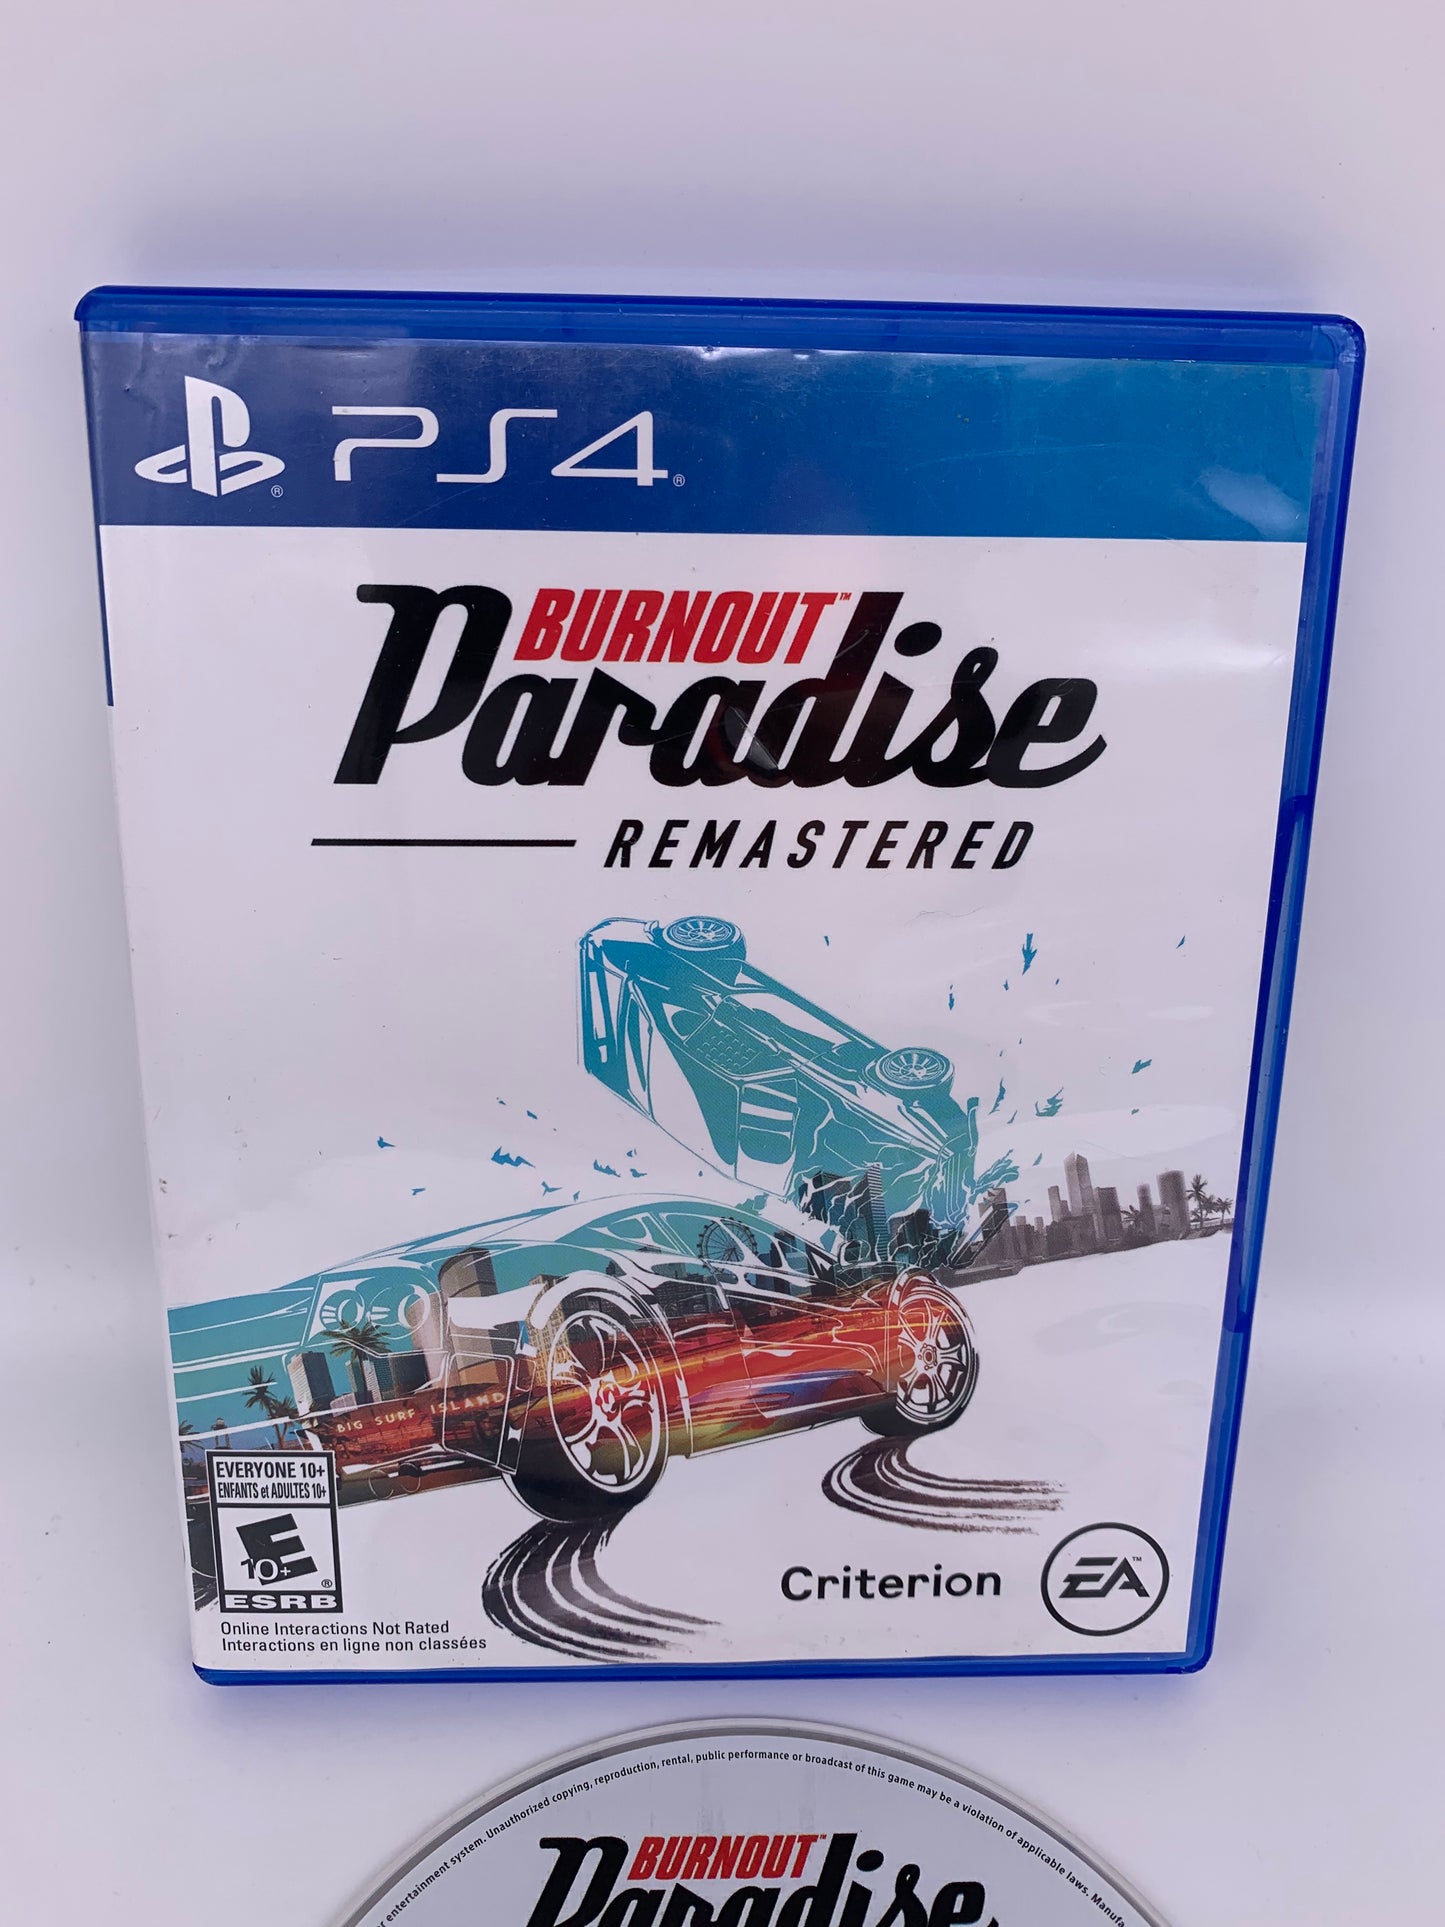 SONY PLAYSTATiON 4 [PS4] | BURNOUT PARADiSE REMASTERED